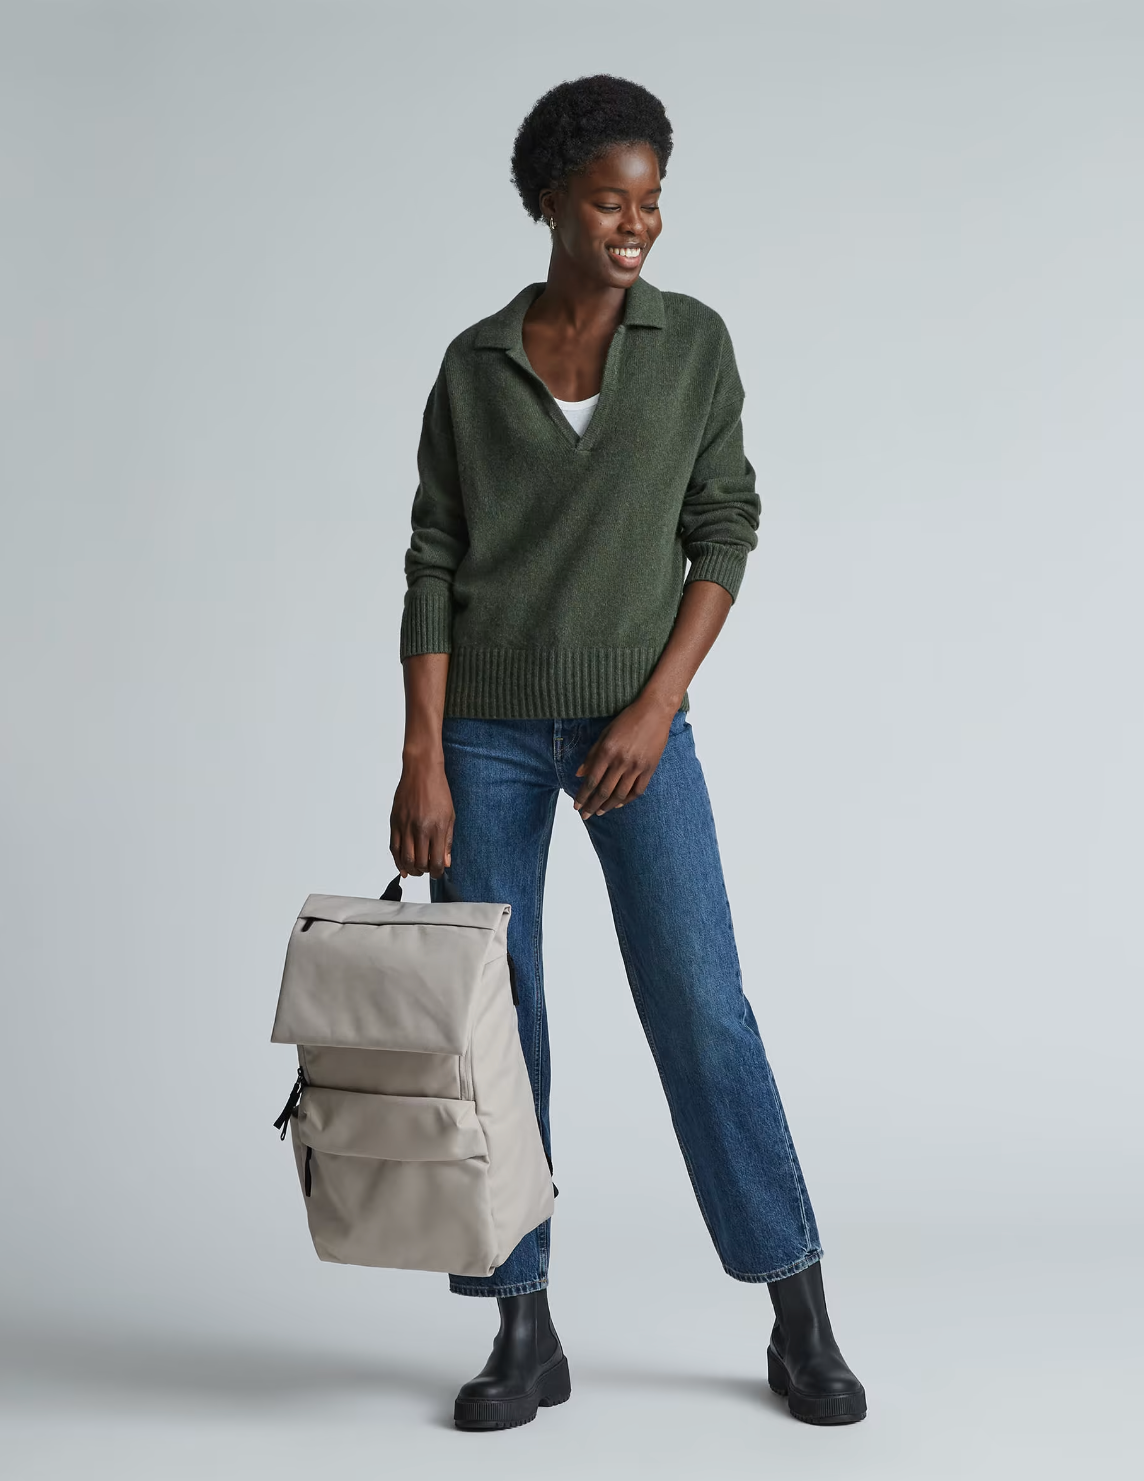 A model holds the Everlane ReNew Transit Backpack by its handles.